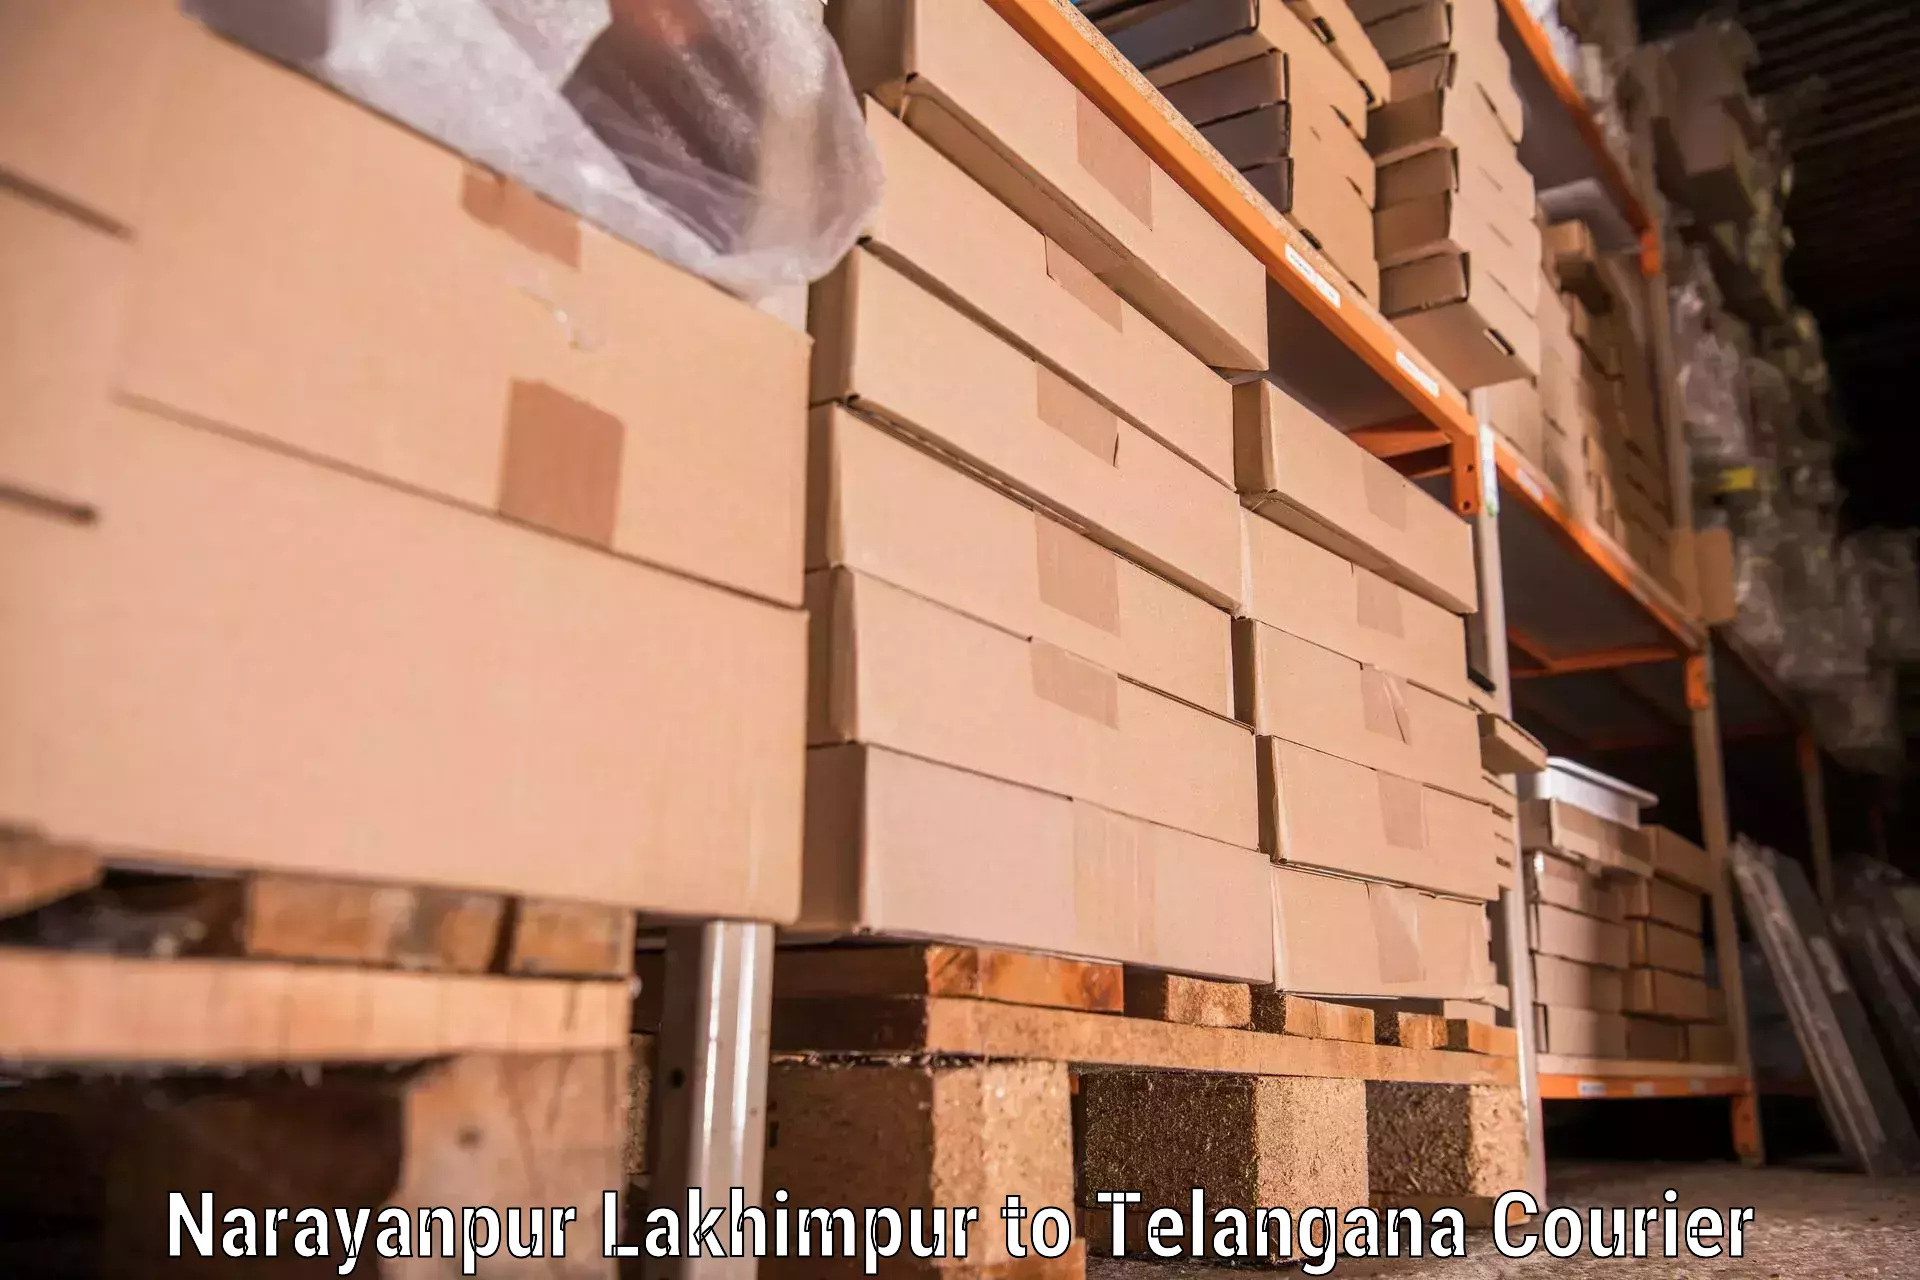 Efficient packing services Narayanpur Lakhimpur to Bhainsa